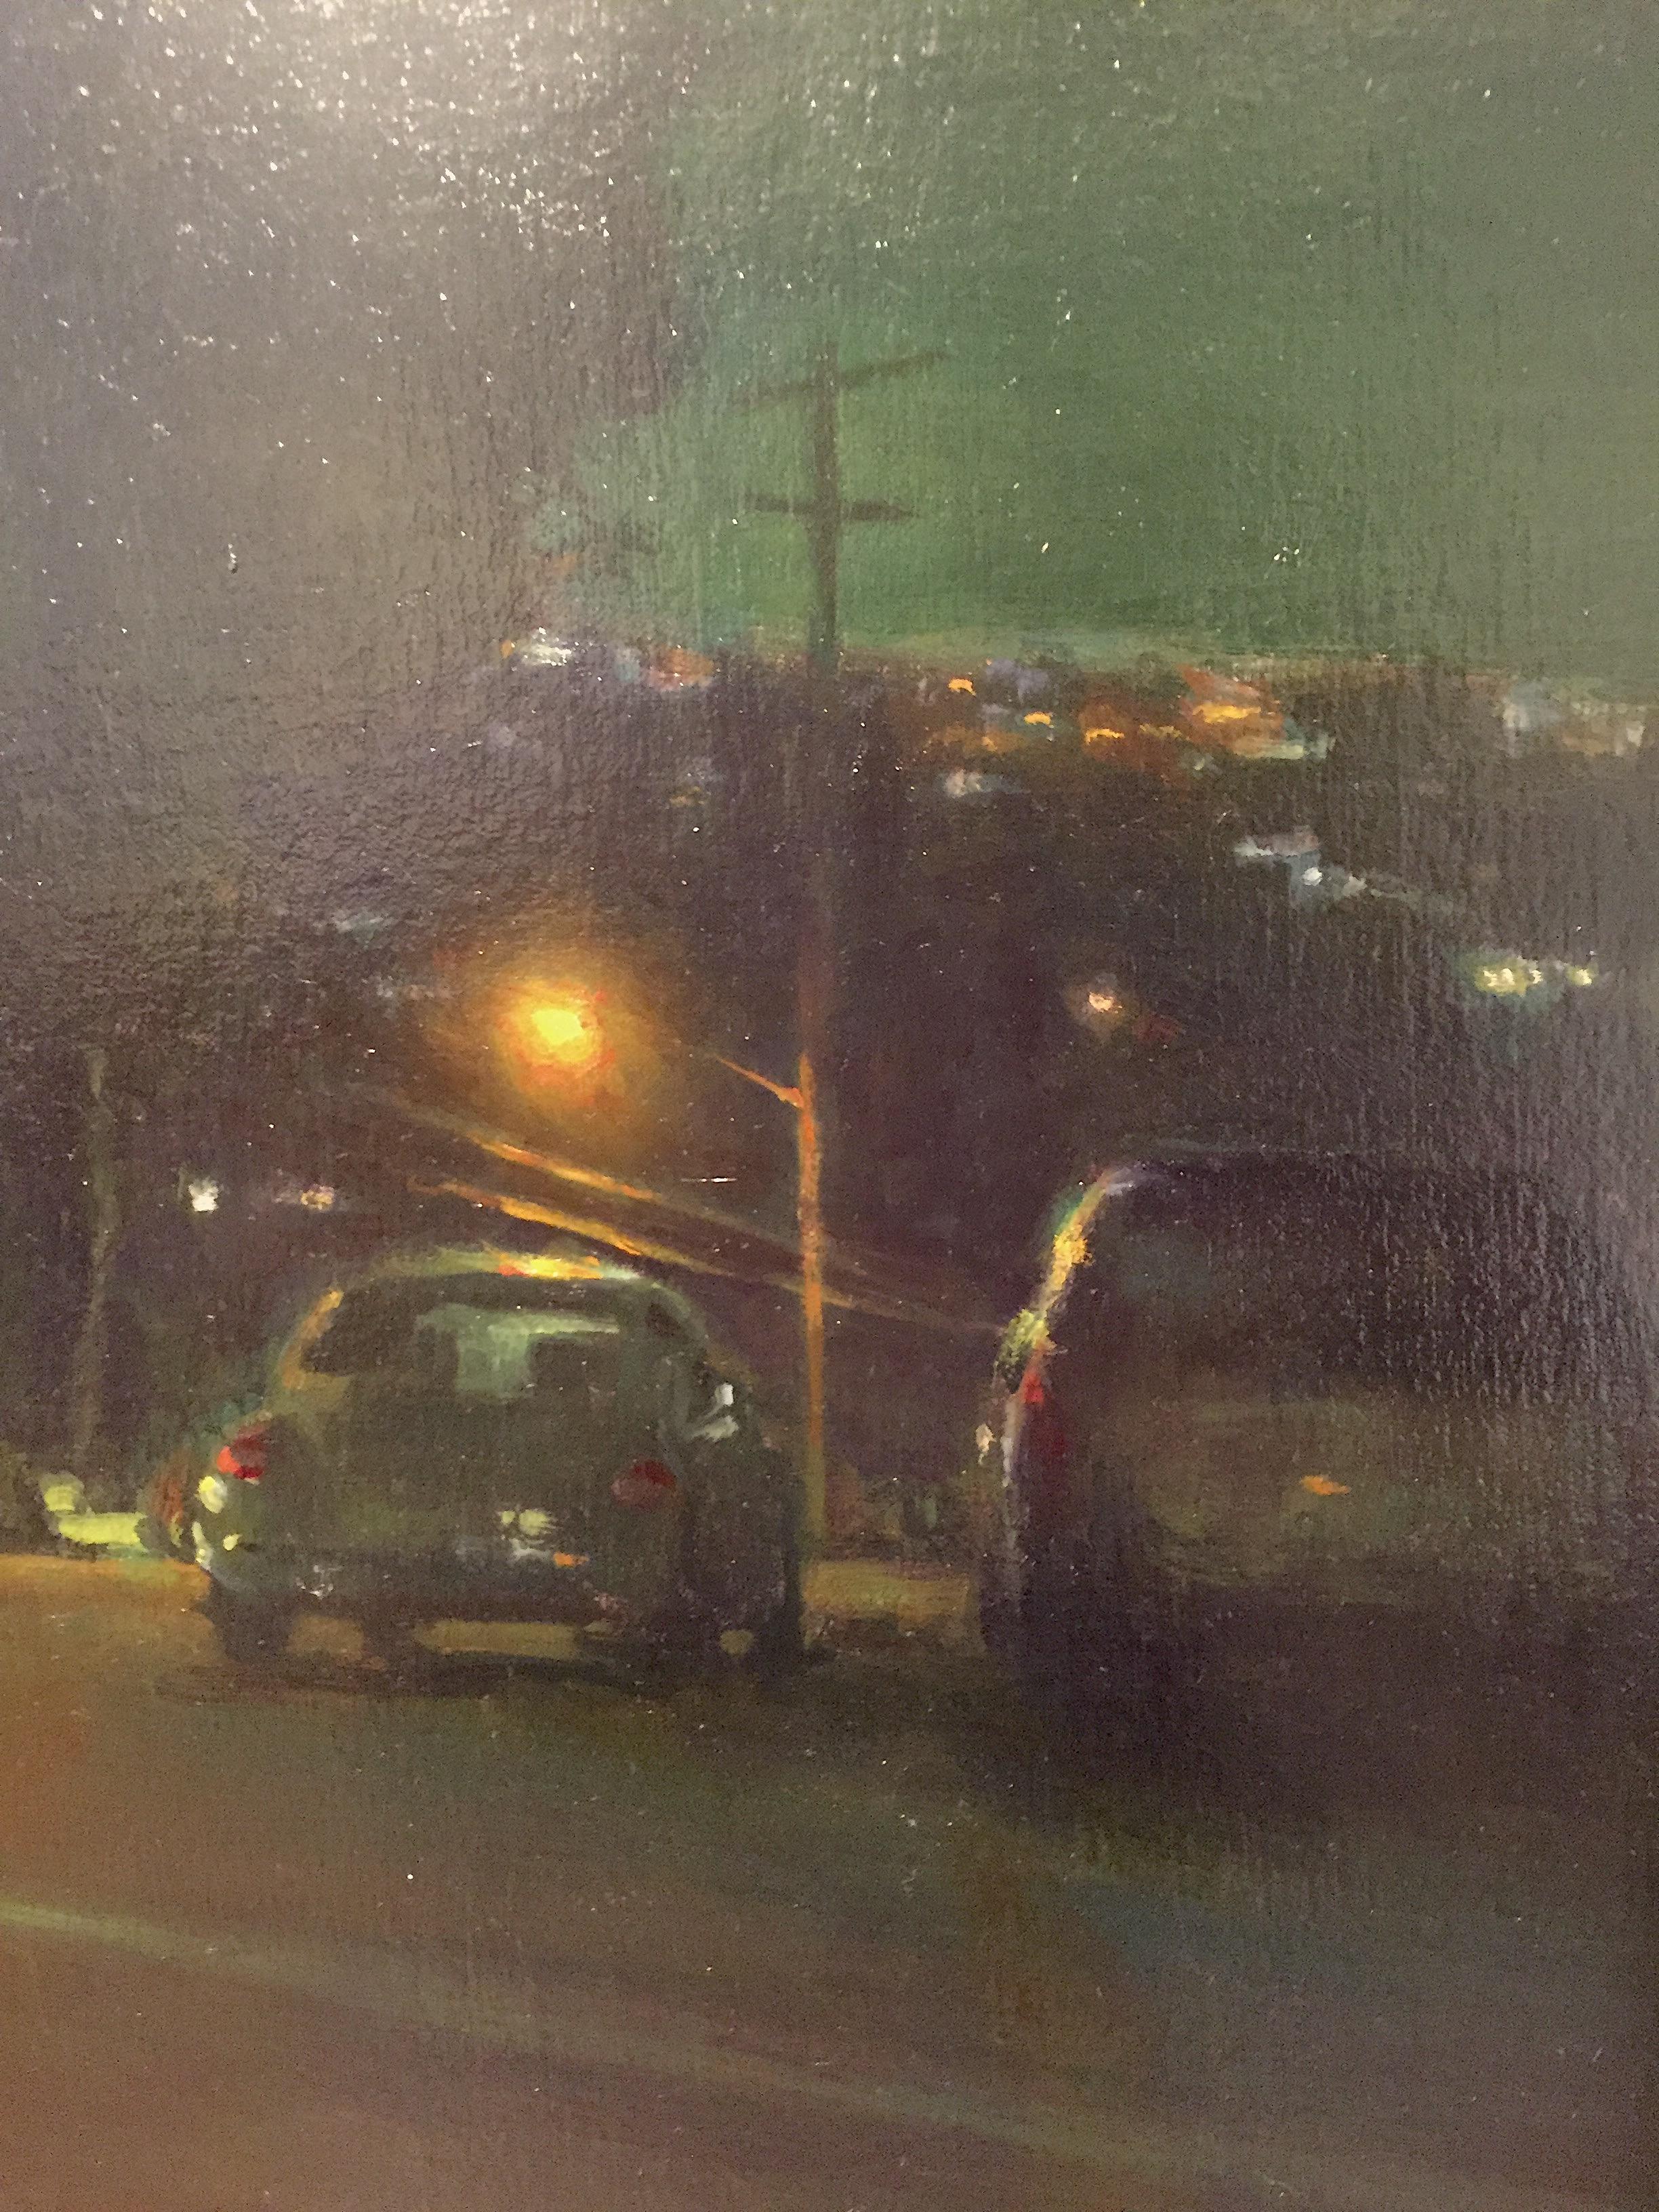 Oil painting of a quiet street at night. Cars are parked along the side of the road, and a large tree is obscurely centered. 


Carl Bretzke is a representational painter who specializes in urban scenes and plein-air landscapes. Carl's work has been